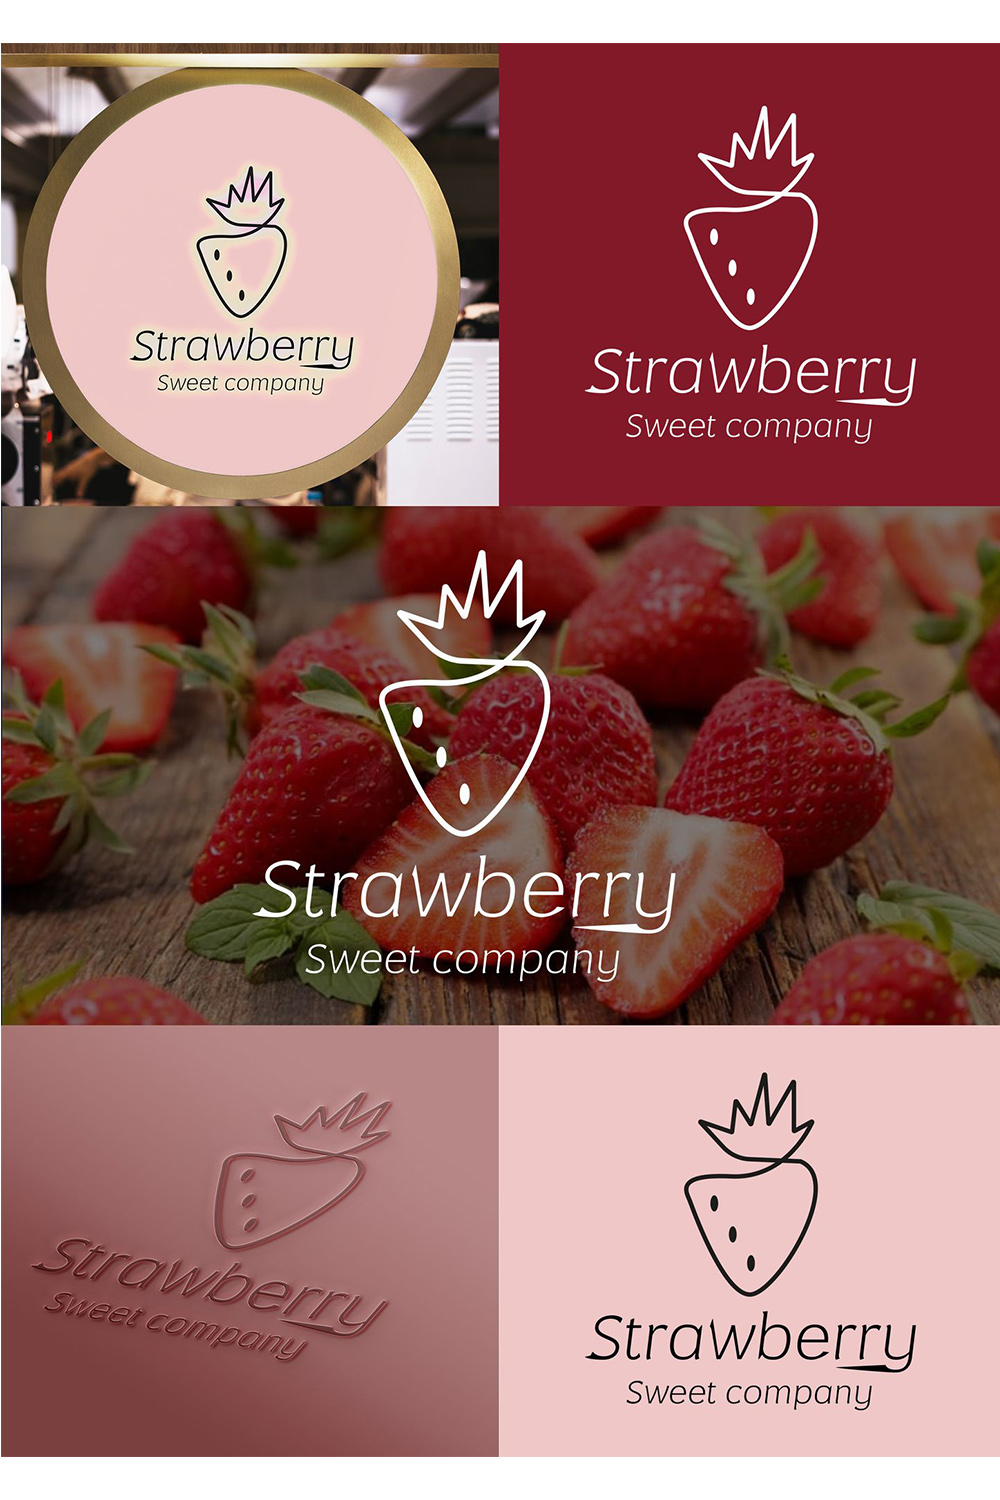 strawberry sweets art confectioner logo pinterest preview image.